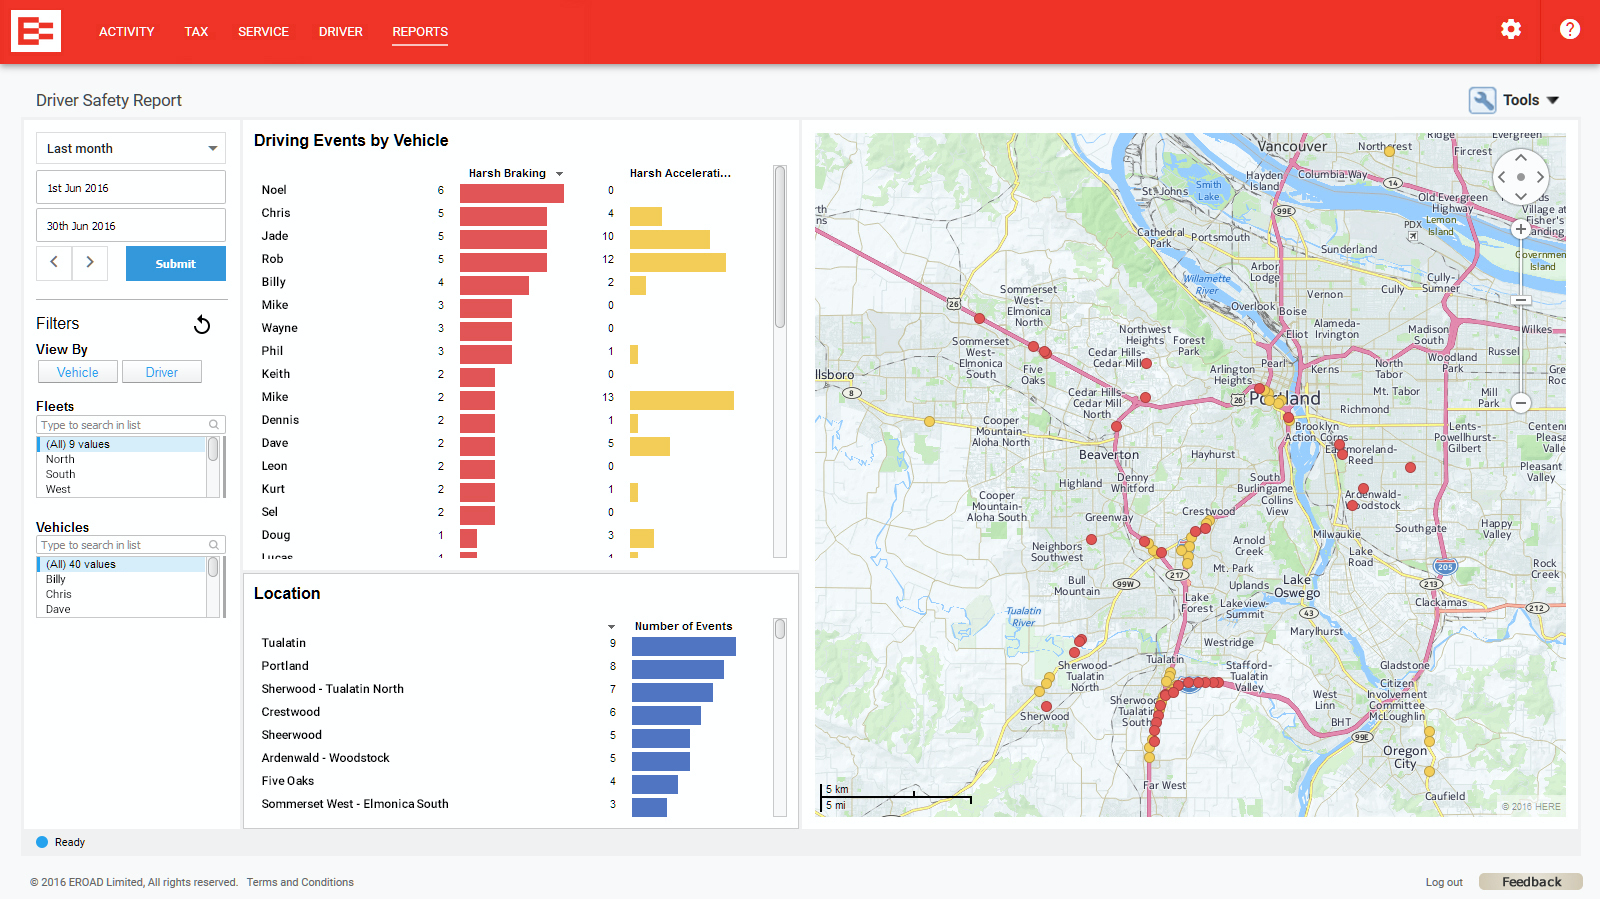 EROAD Software - View reports alongside geographic maps to outline issues or risks